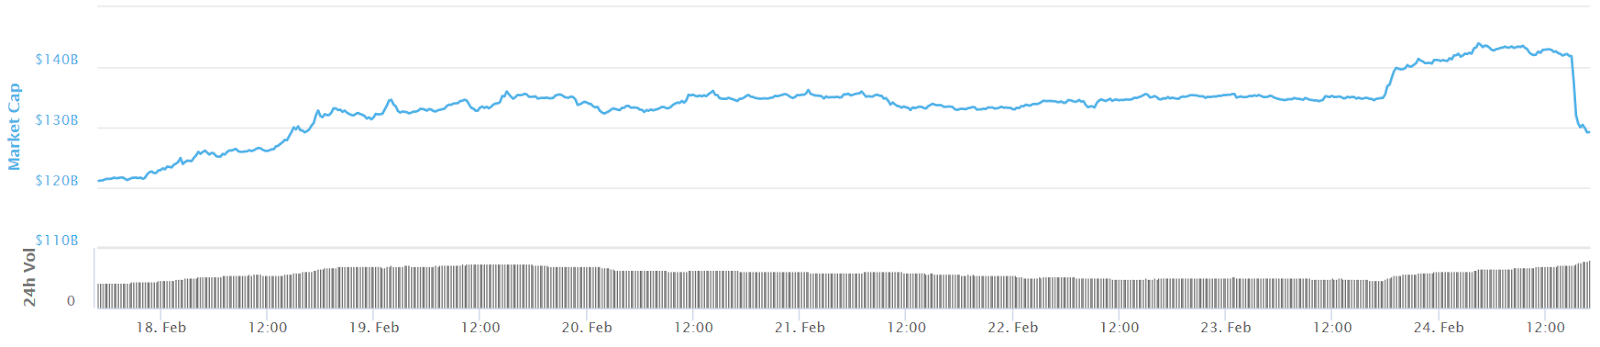 Total market cap of all cryptos 7-day chart